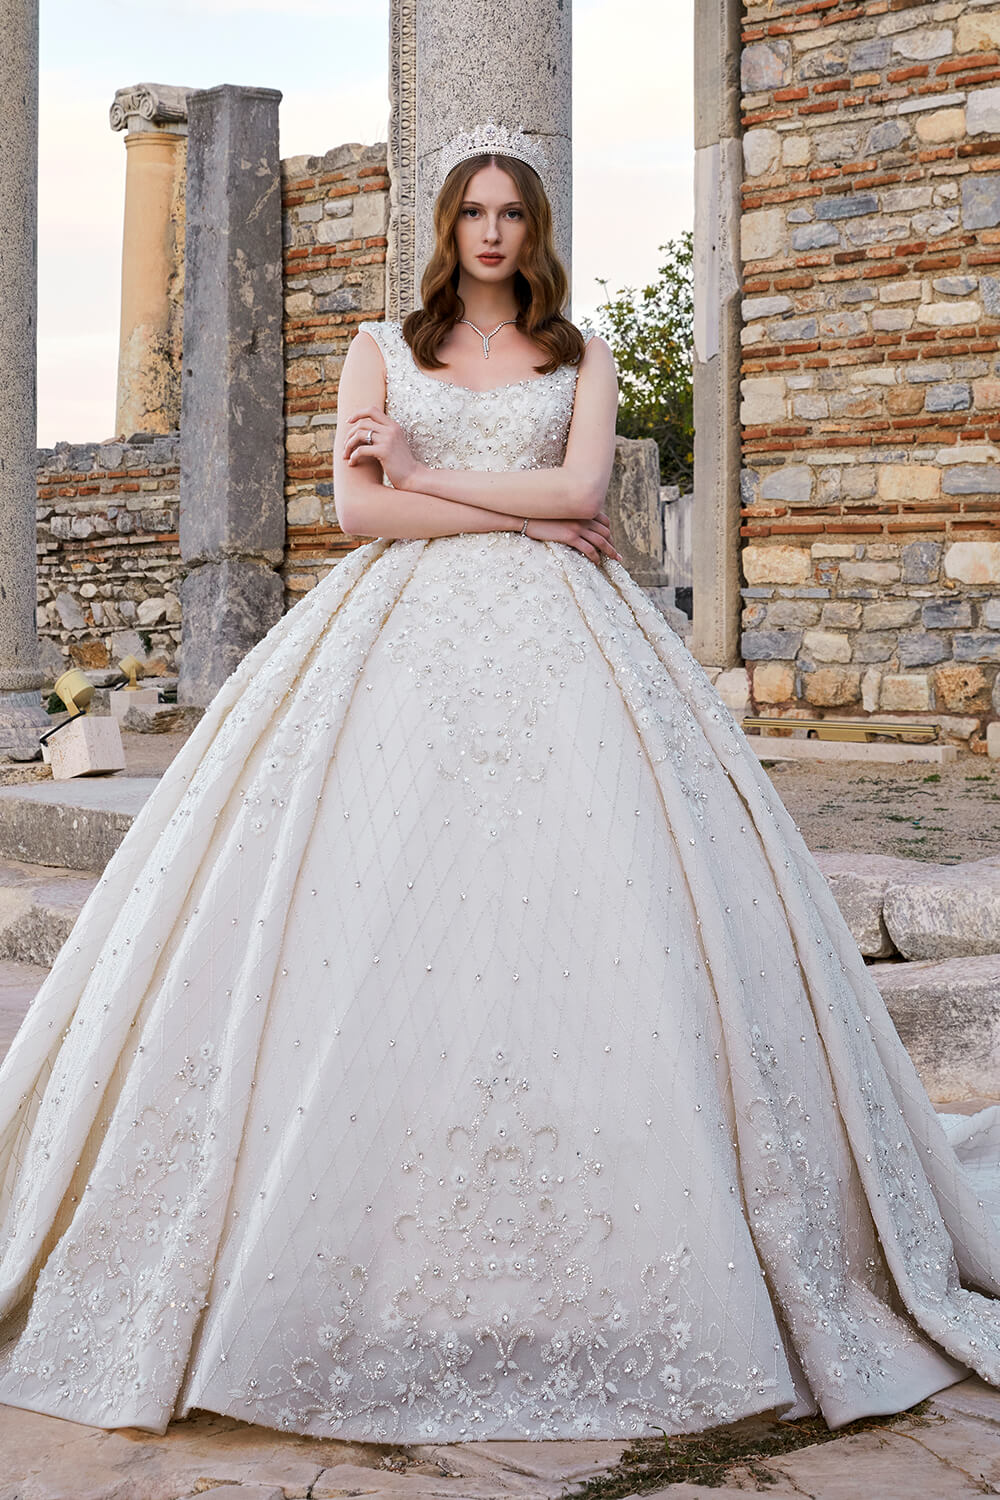 voluminous bedazzled ball gown